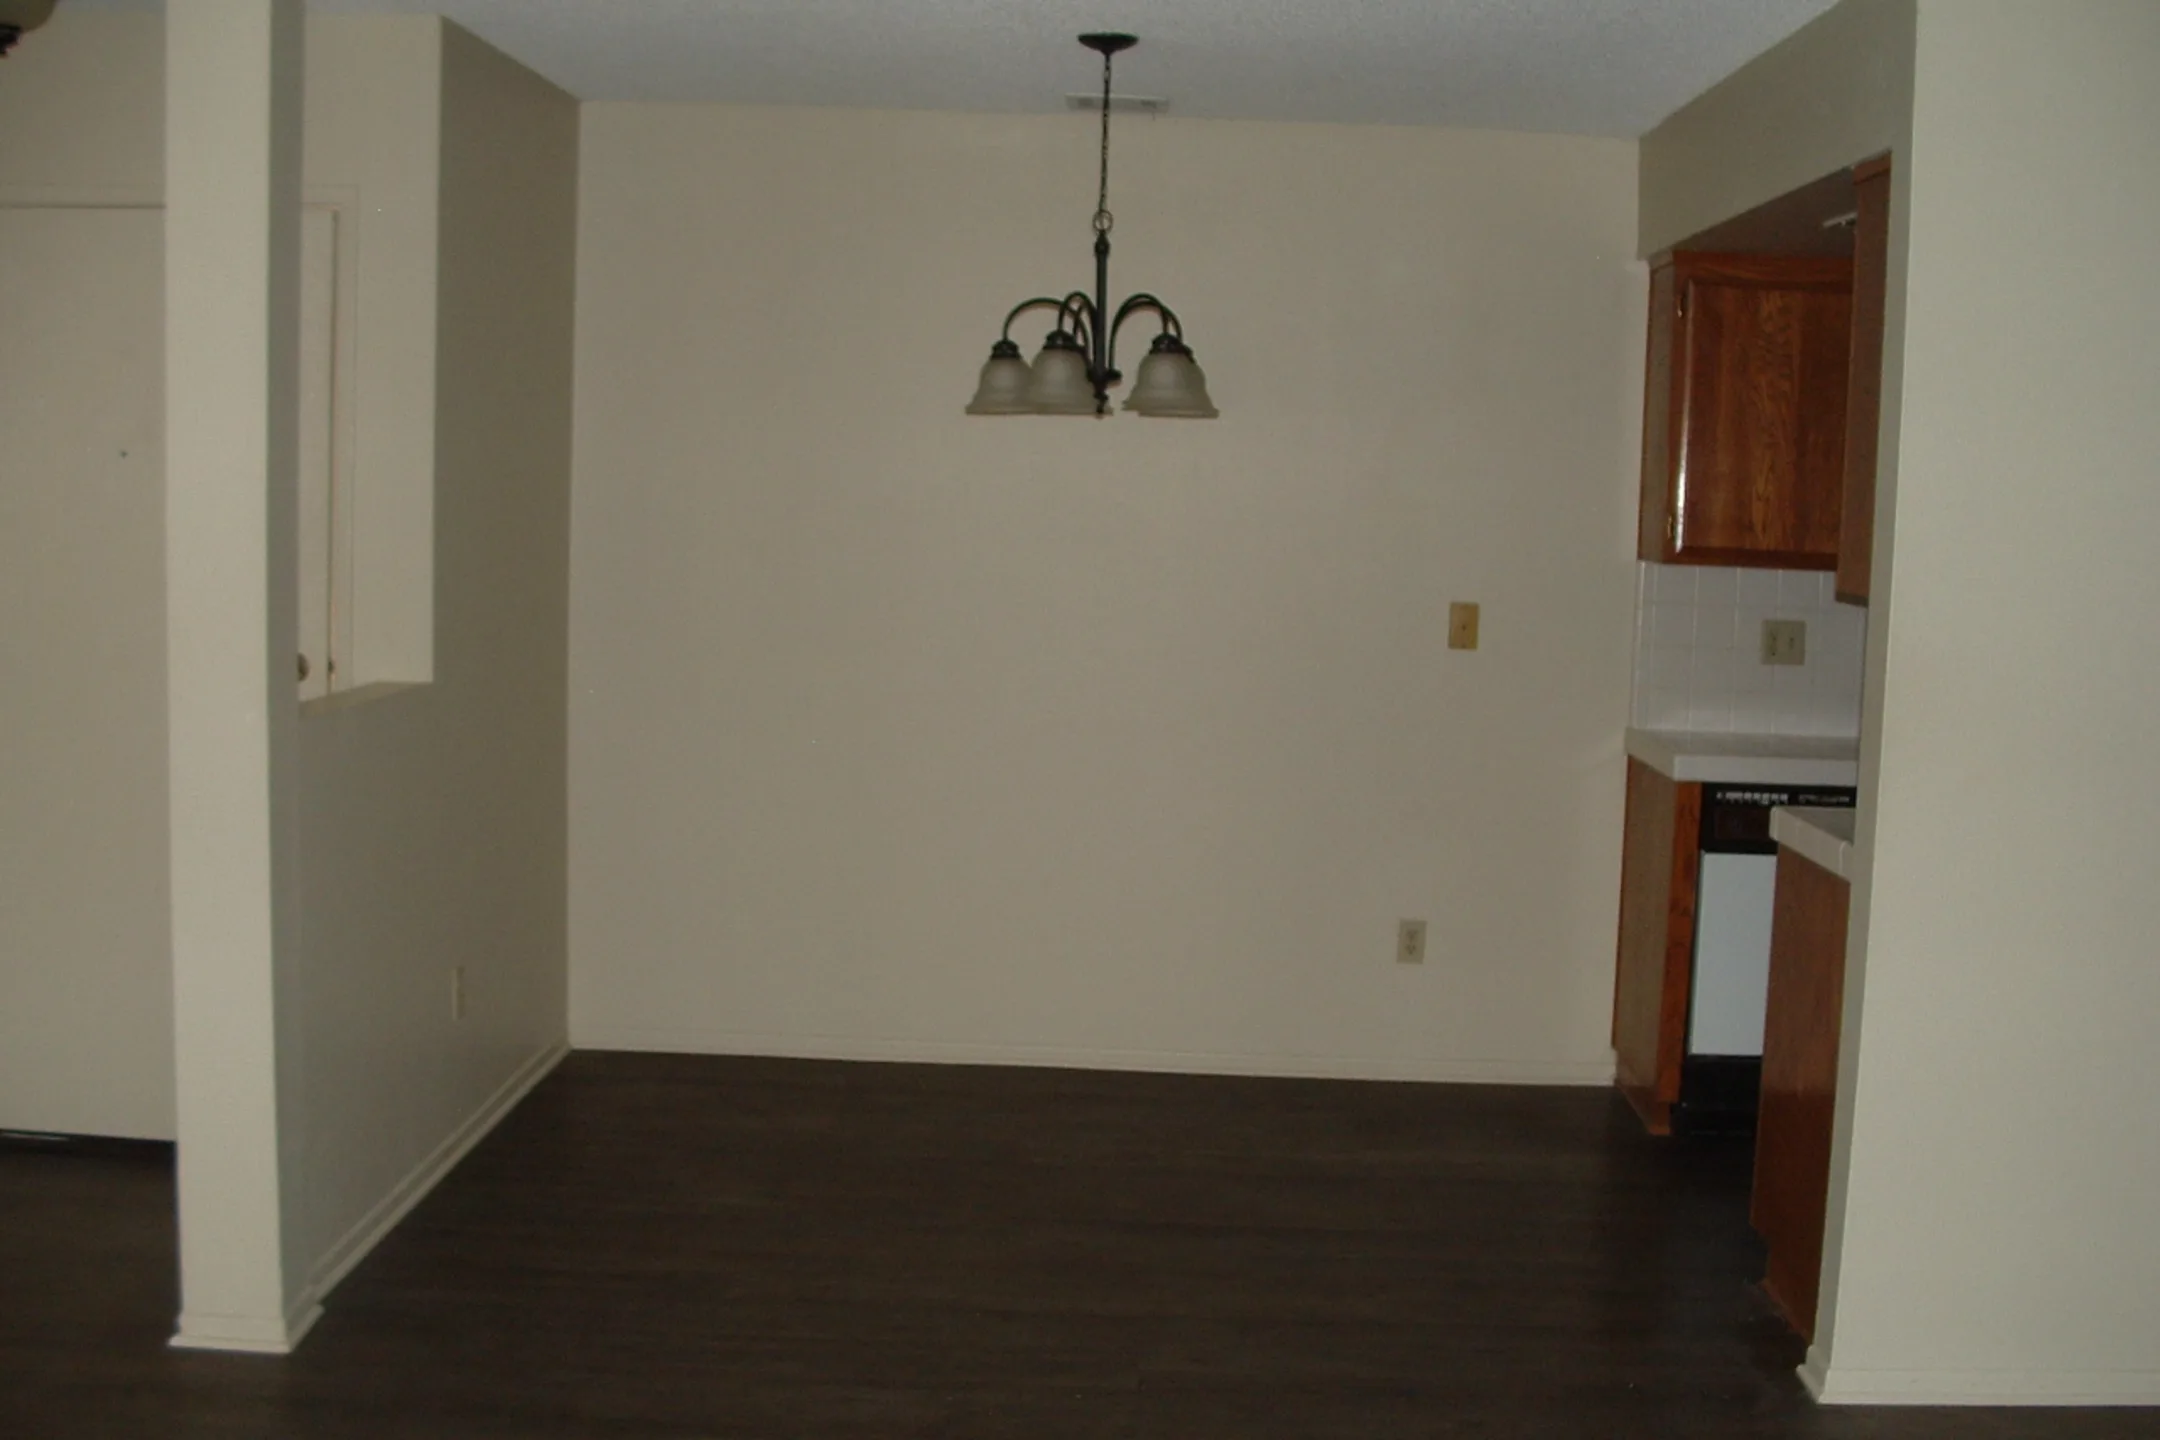 Dining Room - Baywood Apartments - Simi Valley, CA